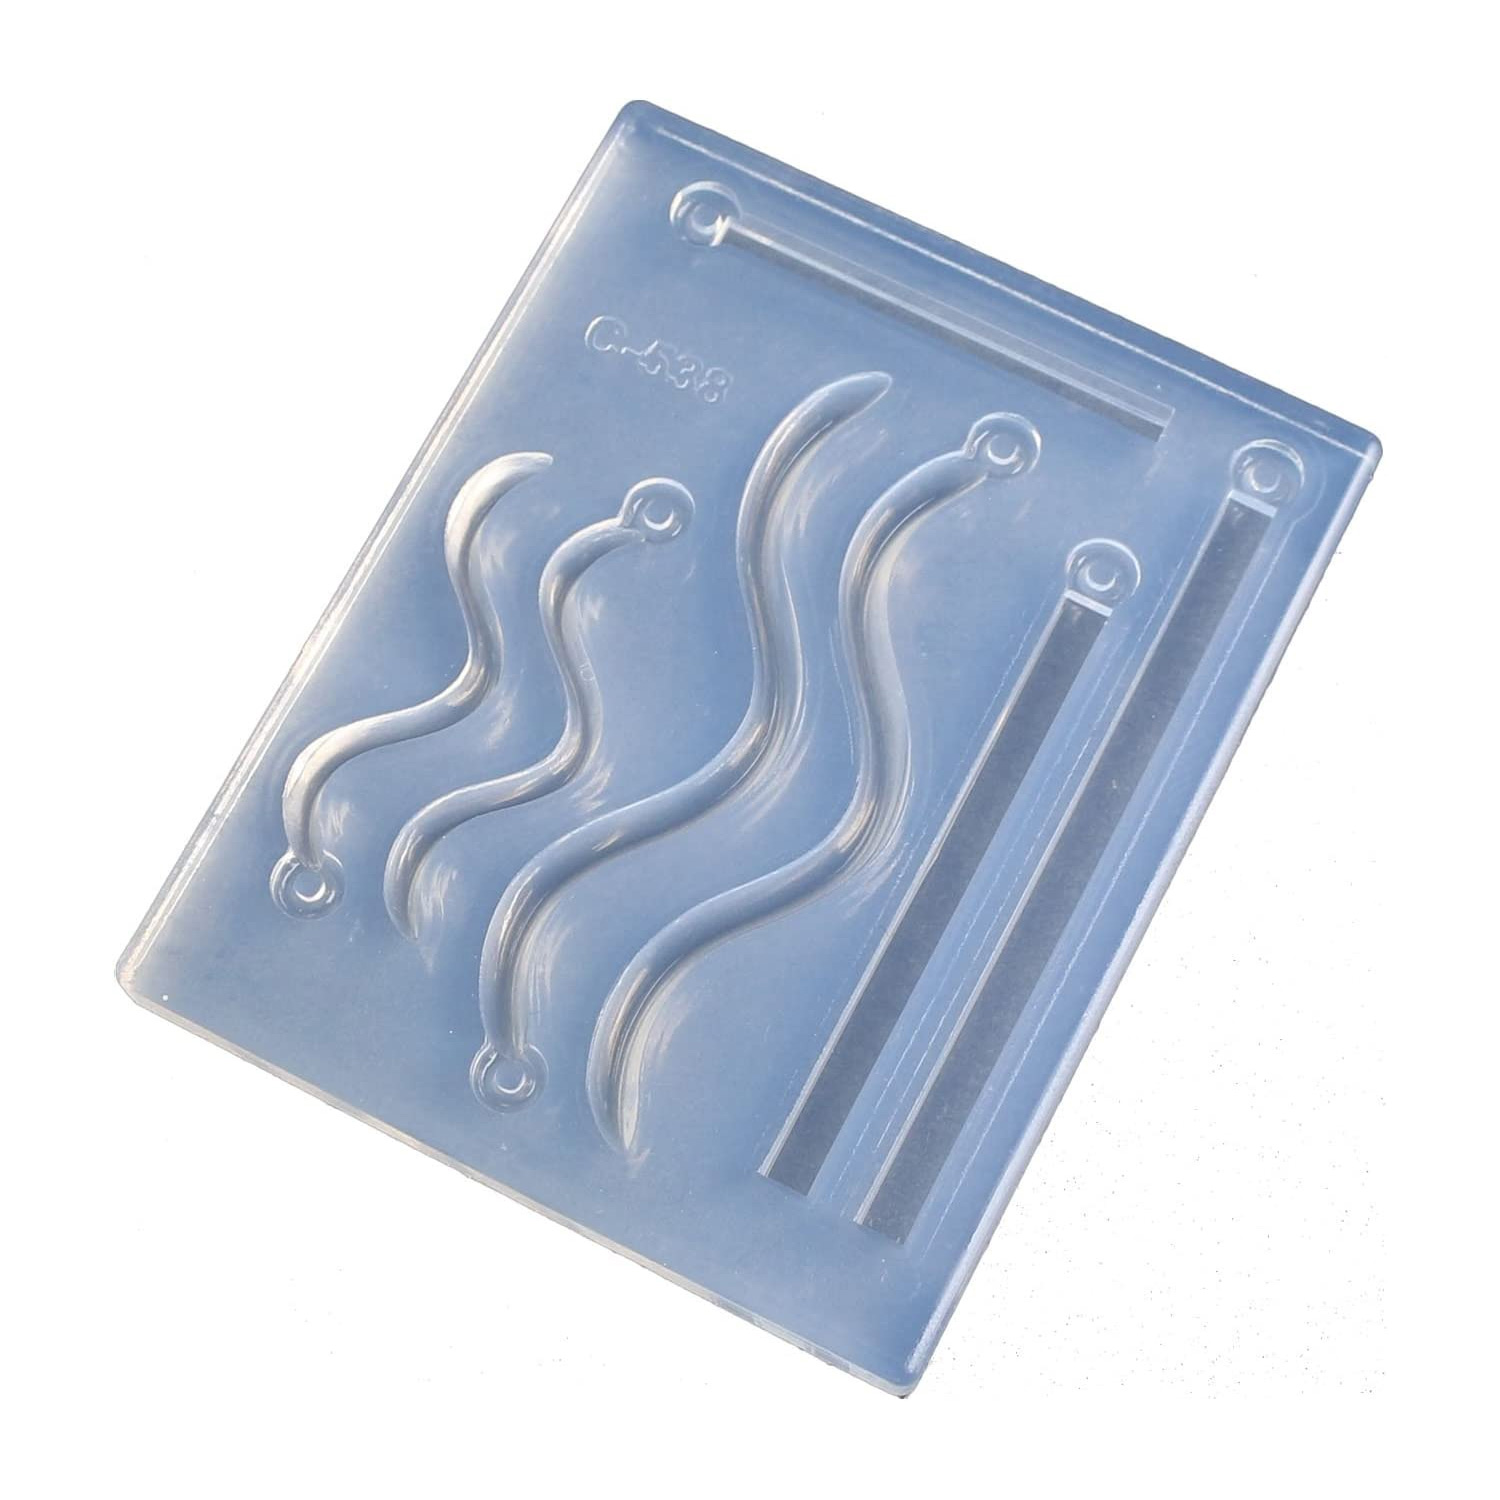 KAM-REJ-538  Resin Crafting Silicone Mold  (pcs)